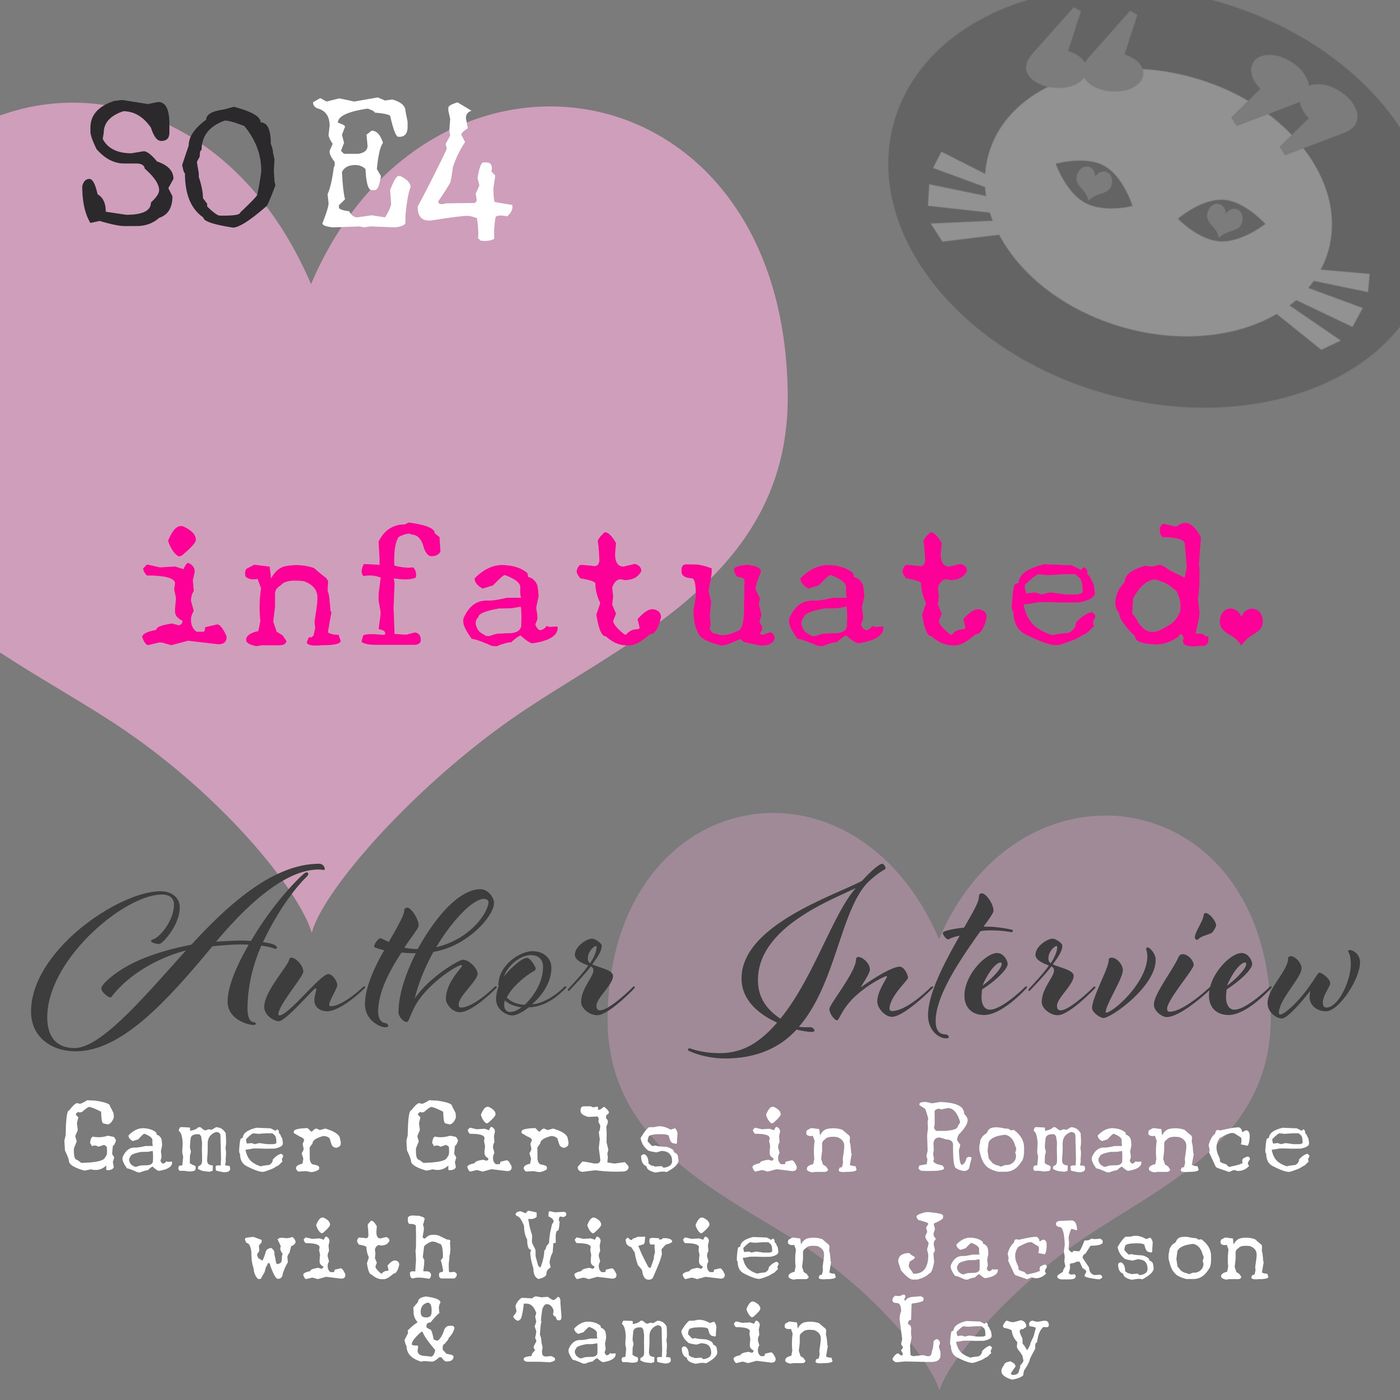 S0E4: Gamer Girls In Romance with Vivien Jackson & Tamsin Ley